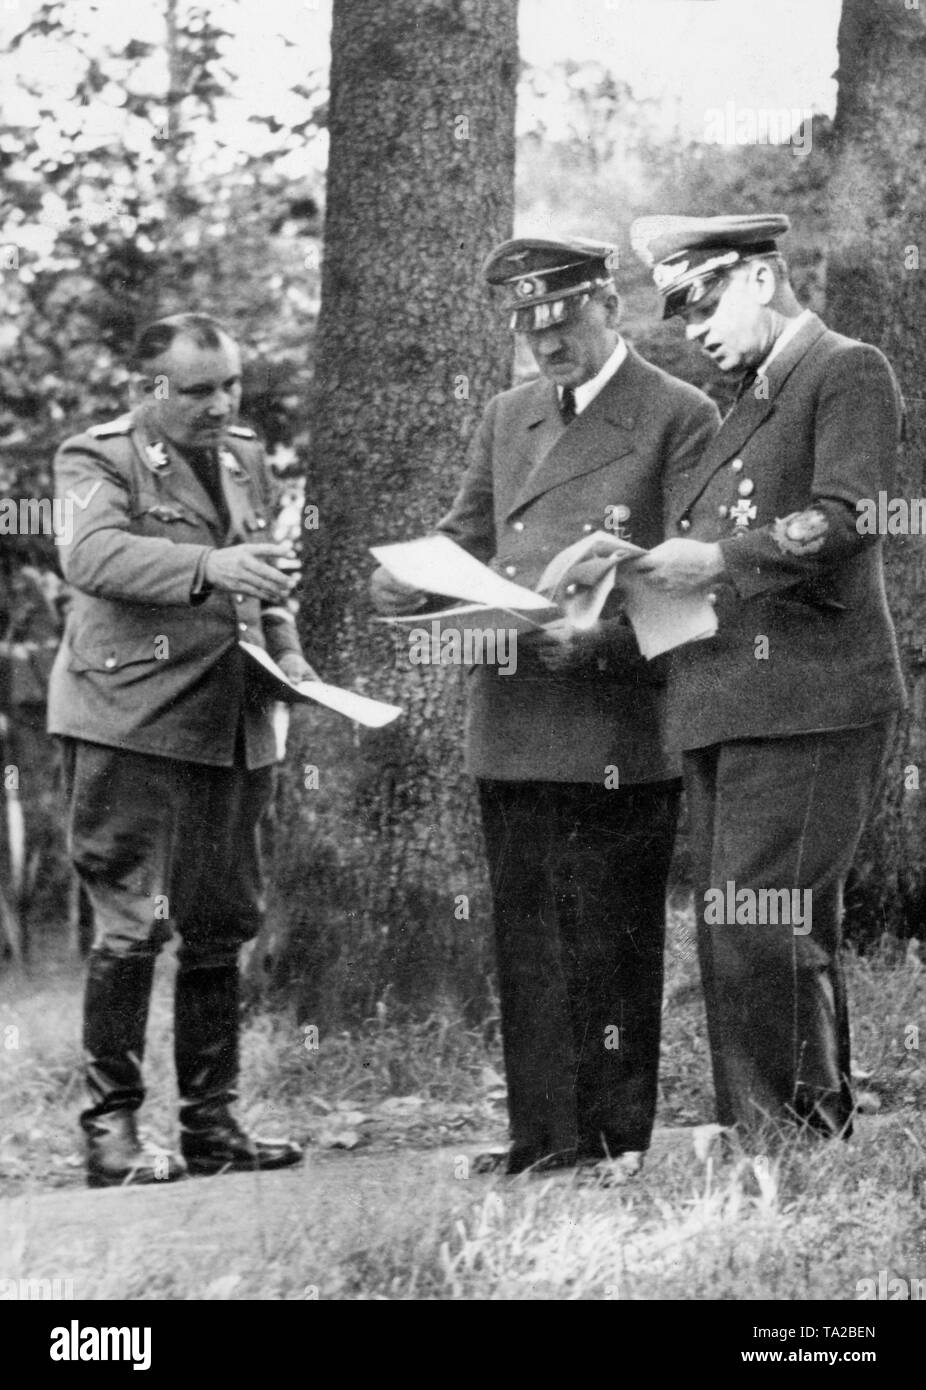 From left to right: Martin Bormann, Adolf Hitler and Joachim von Ribbentrop during a meeting at Wolf's Lair(German: Wolfsschanze), Adolf Hitler's first Eastern Front military headquarter in World War II Stock Photo